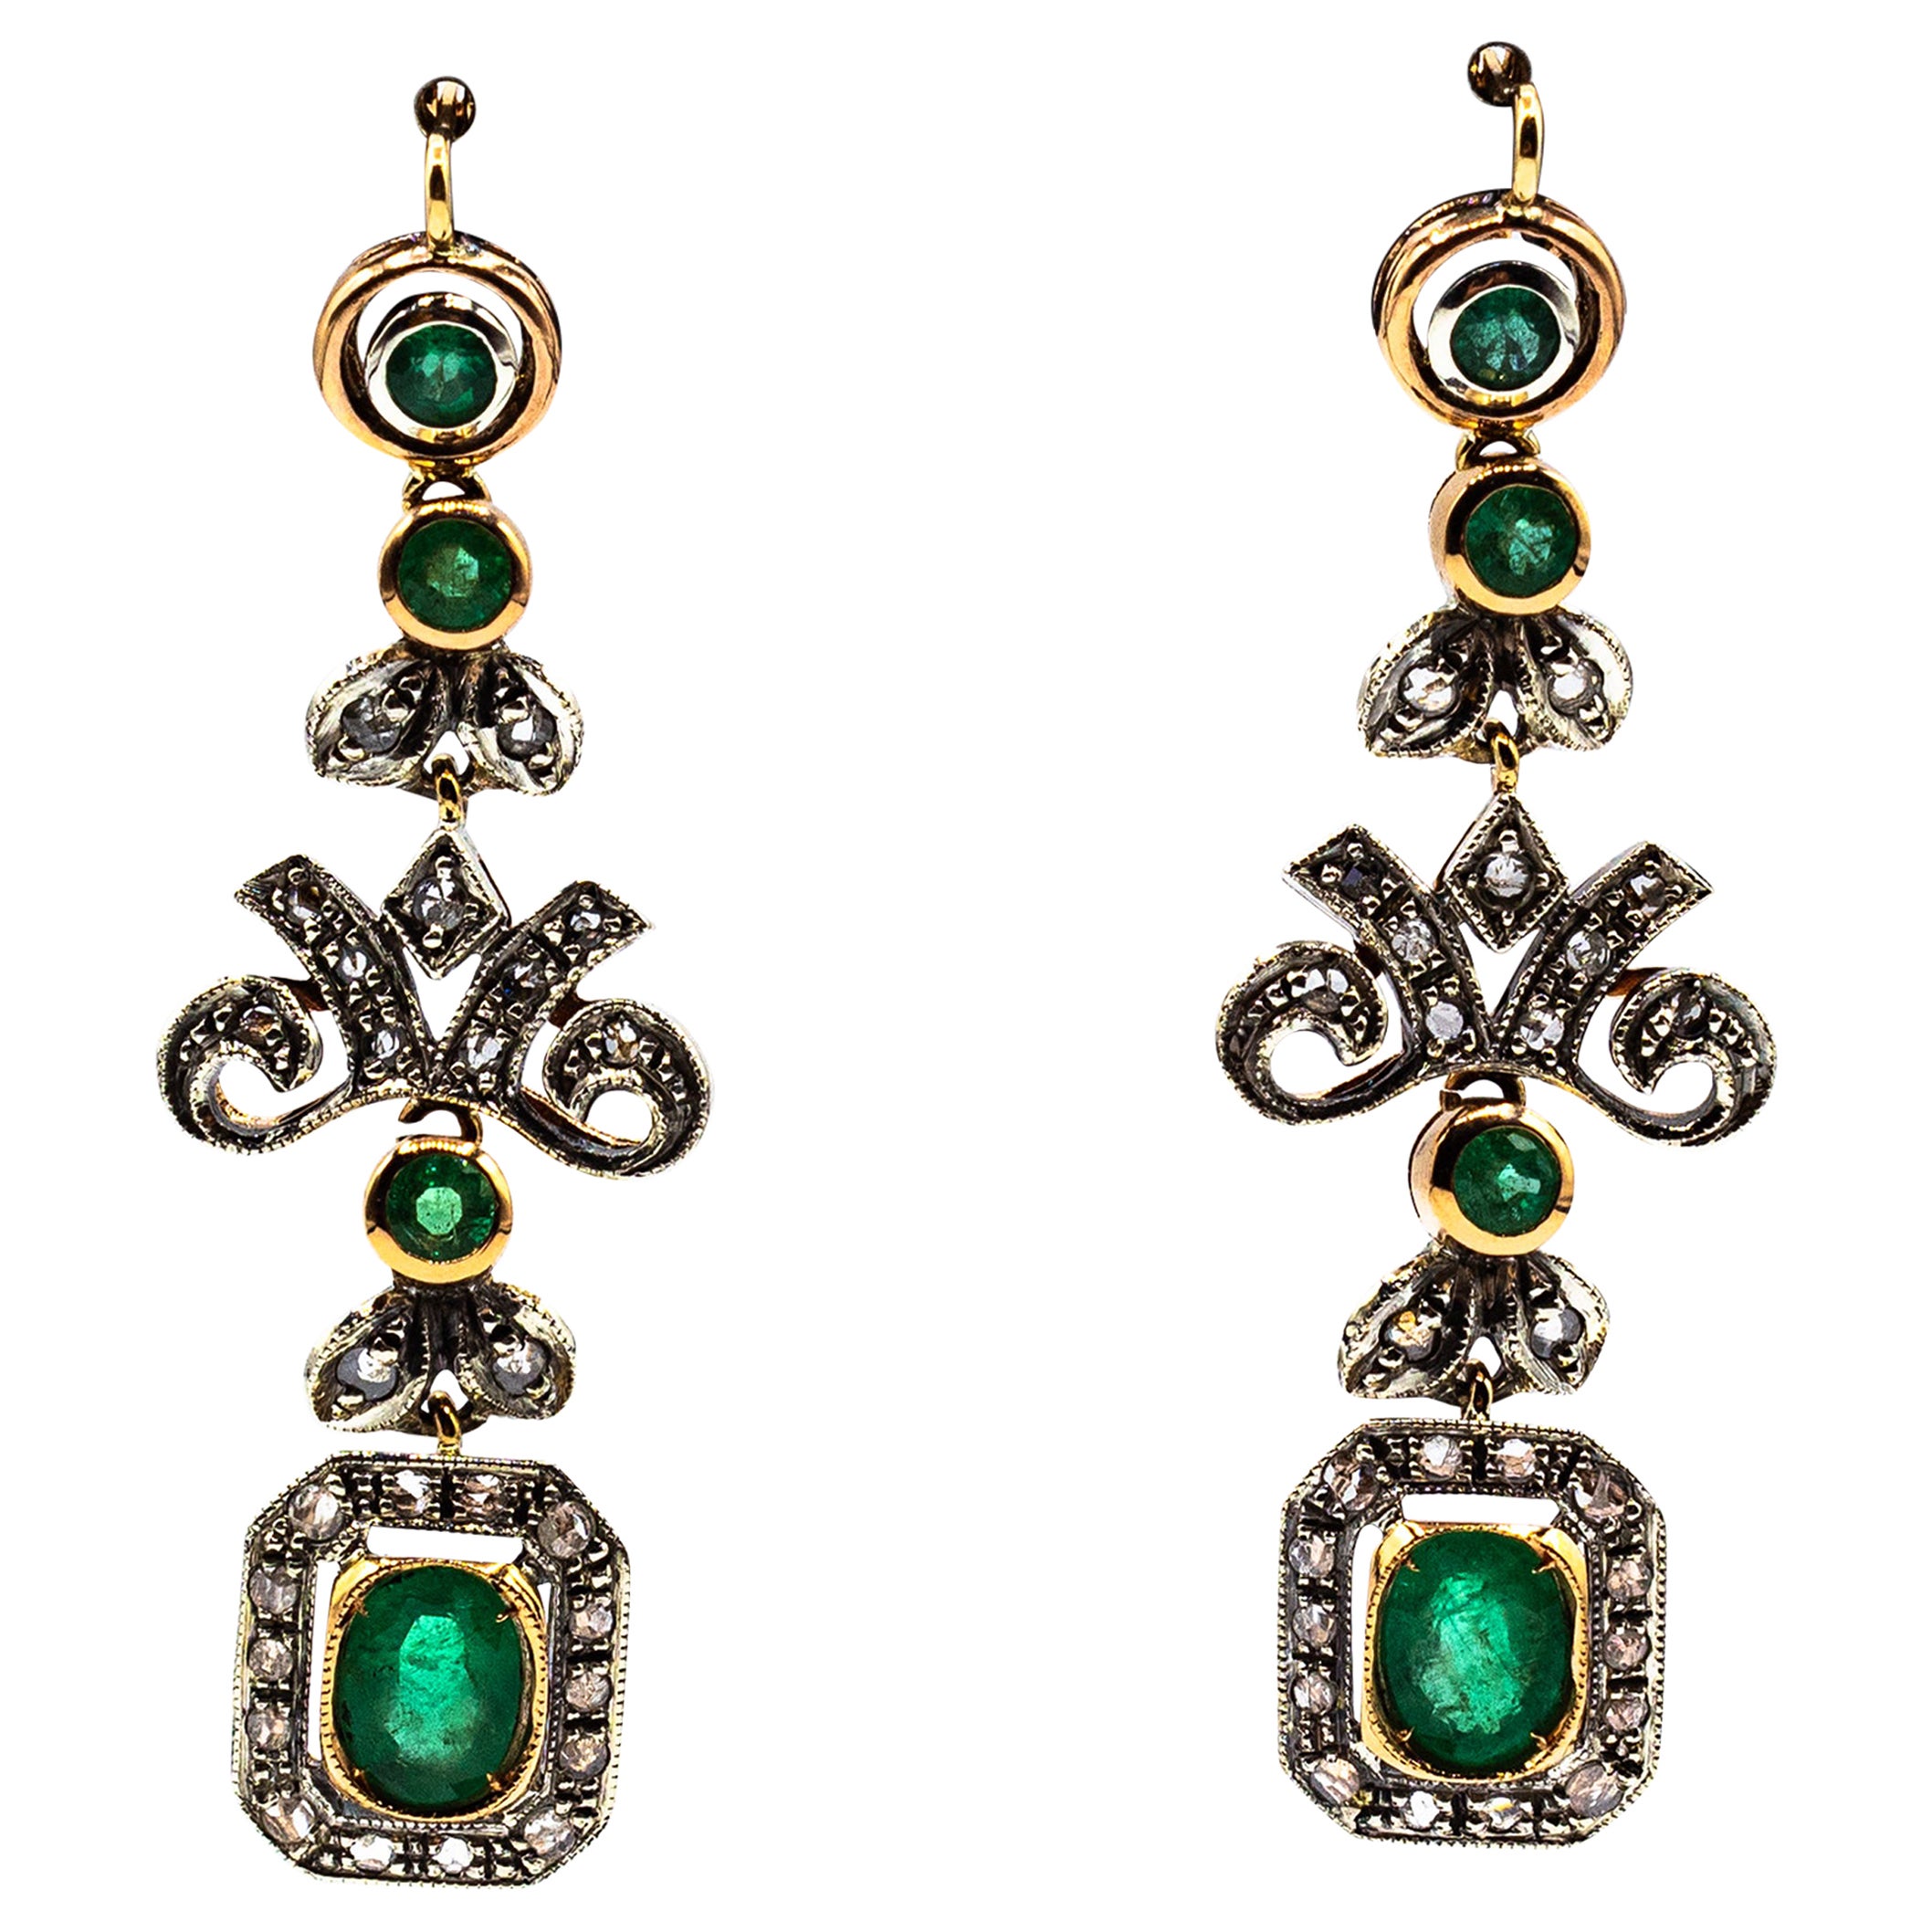 Art Deco Style Handcrafted White Rose Cut Diamond Emerald Yellow Gold Earrings